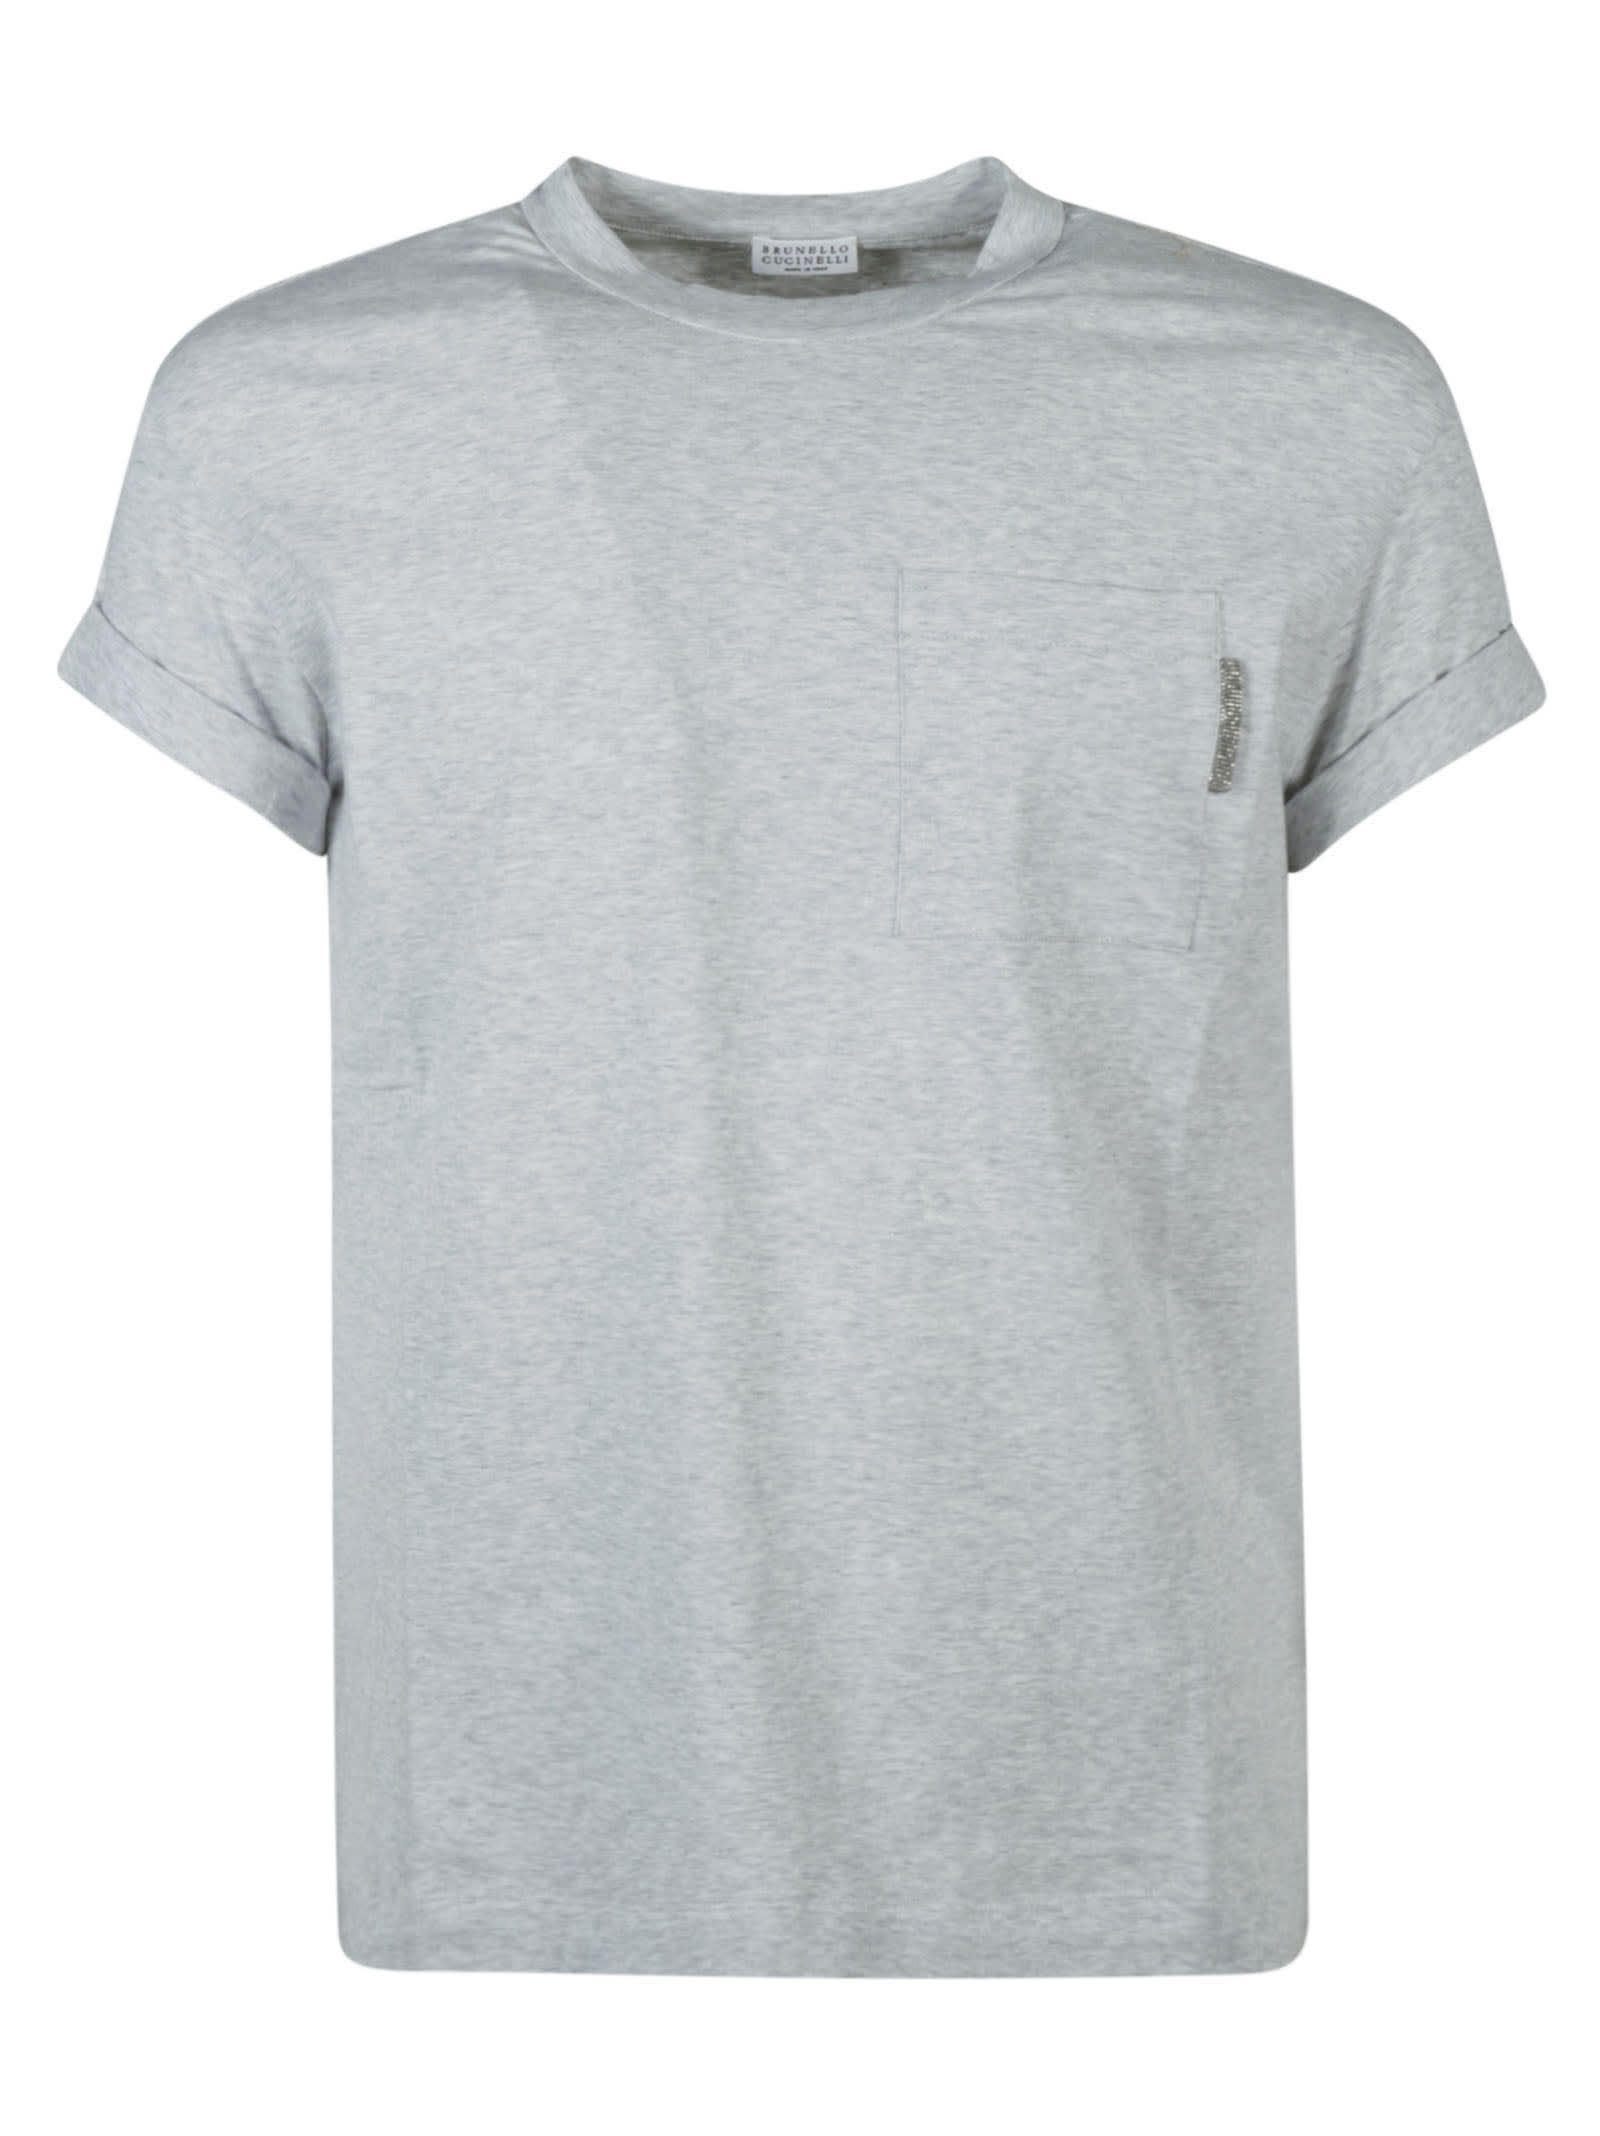 Patched Pocket T-shirt